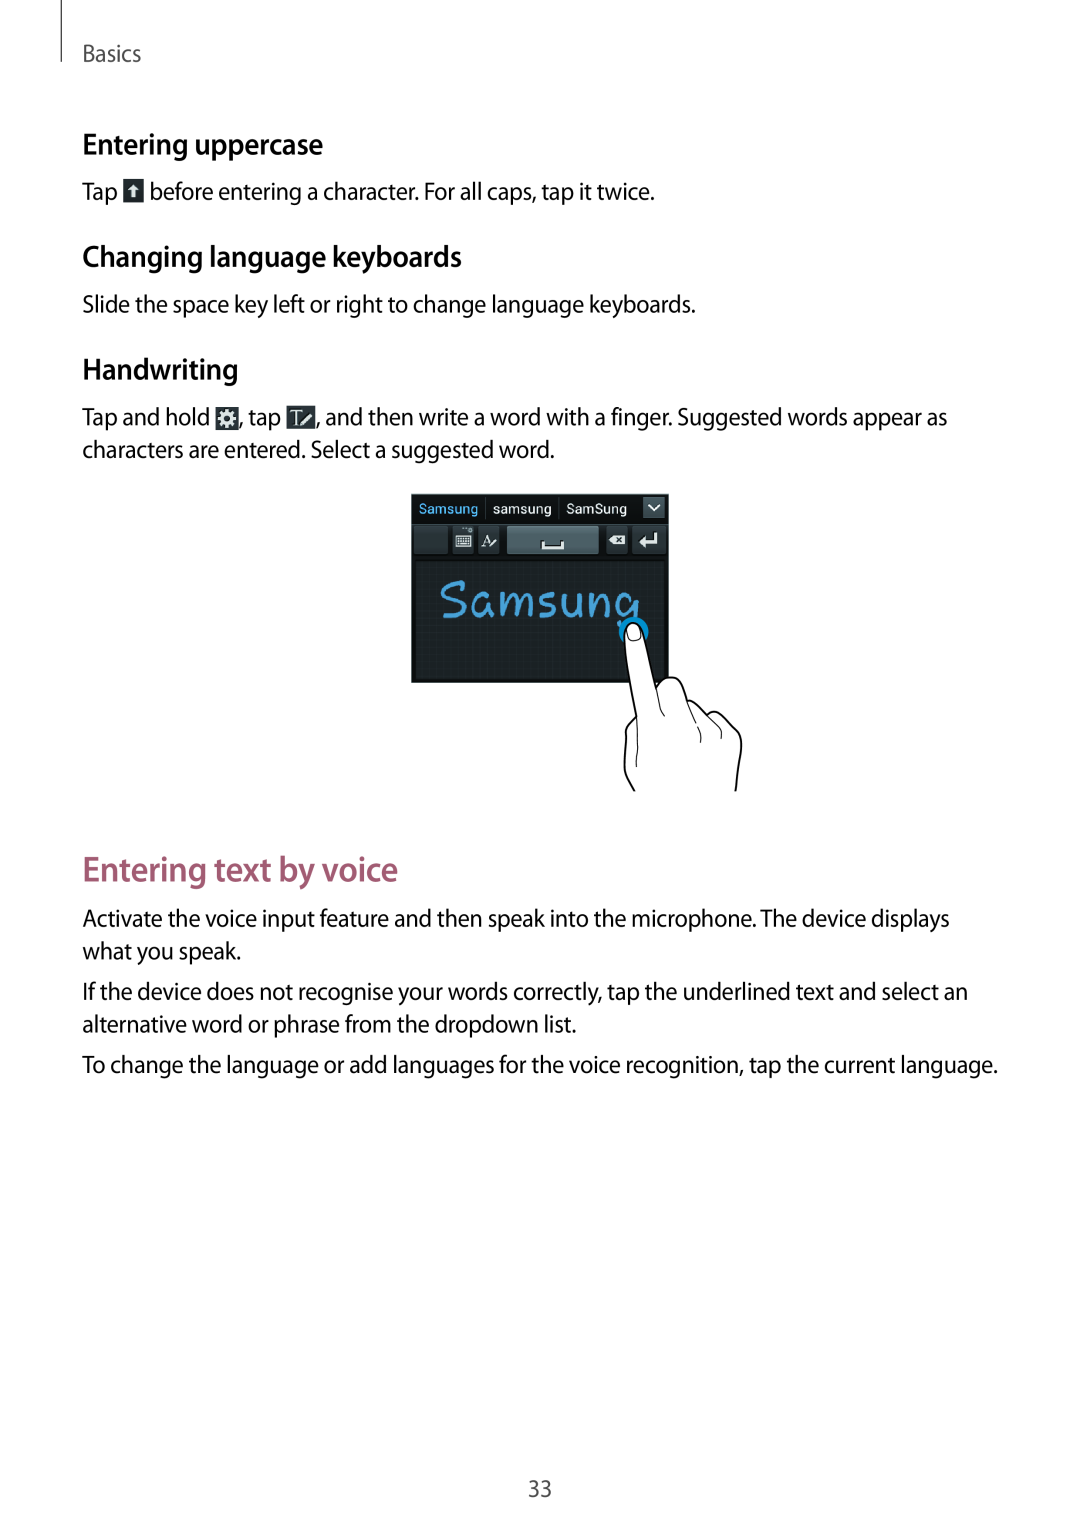 Samsung GT2S7710TAATMH manual Entering text by voice, Entering uppercase, Changing language keyboards, Handwriting, Basics 